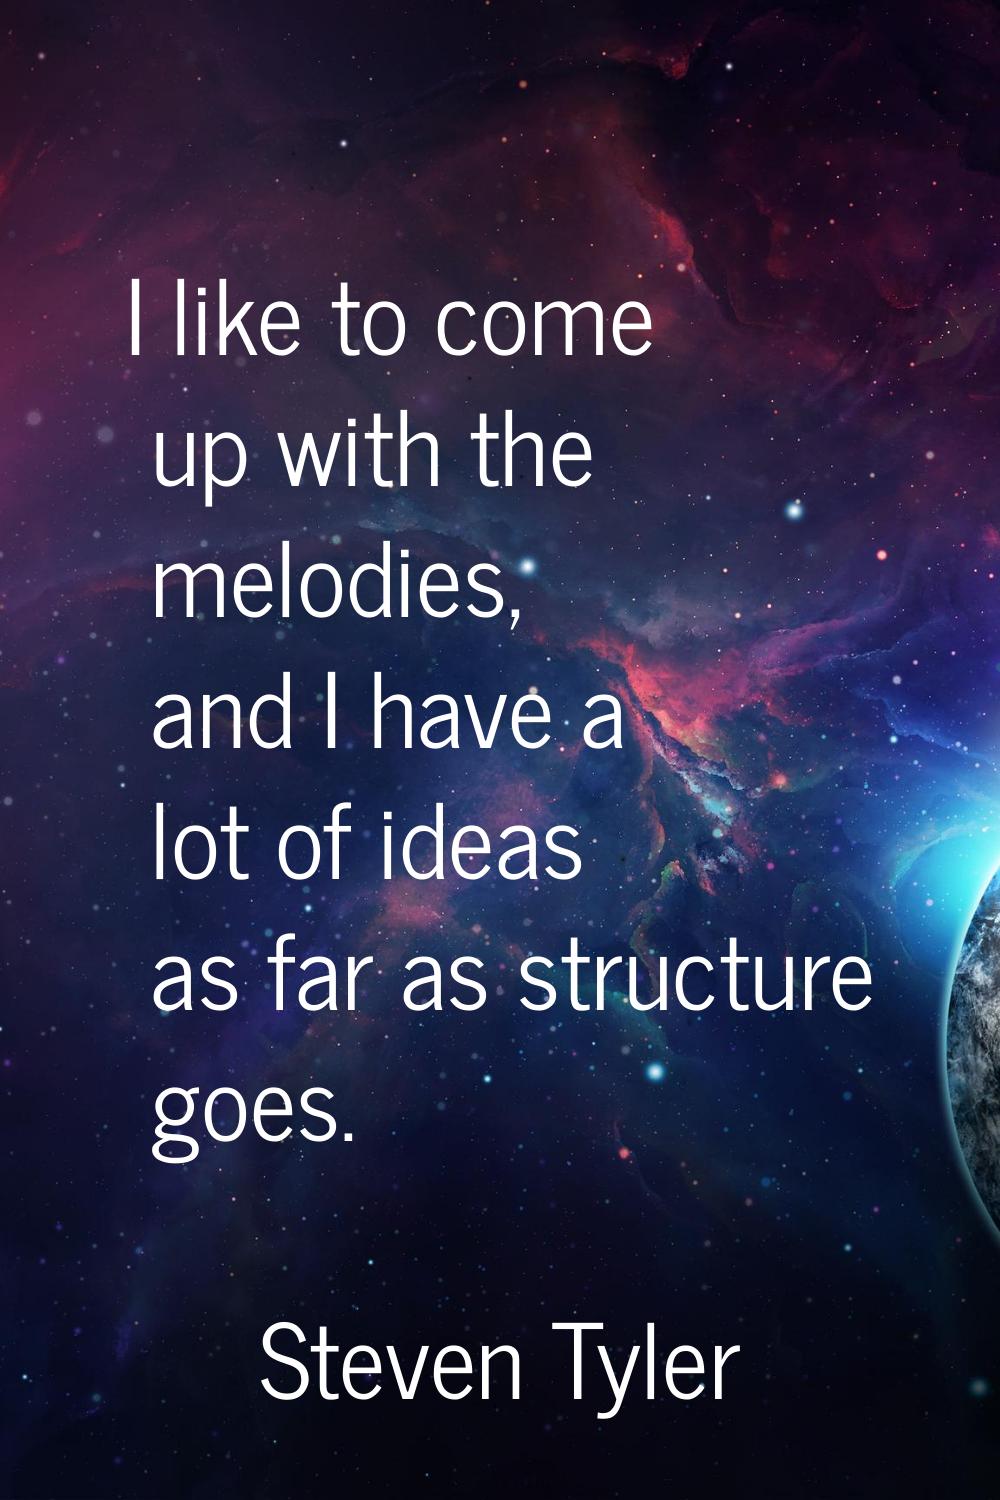 I like to come up with the melodies, and I have a lot of ideas as far as structure goes.